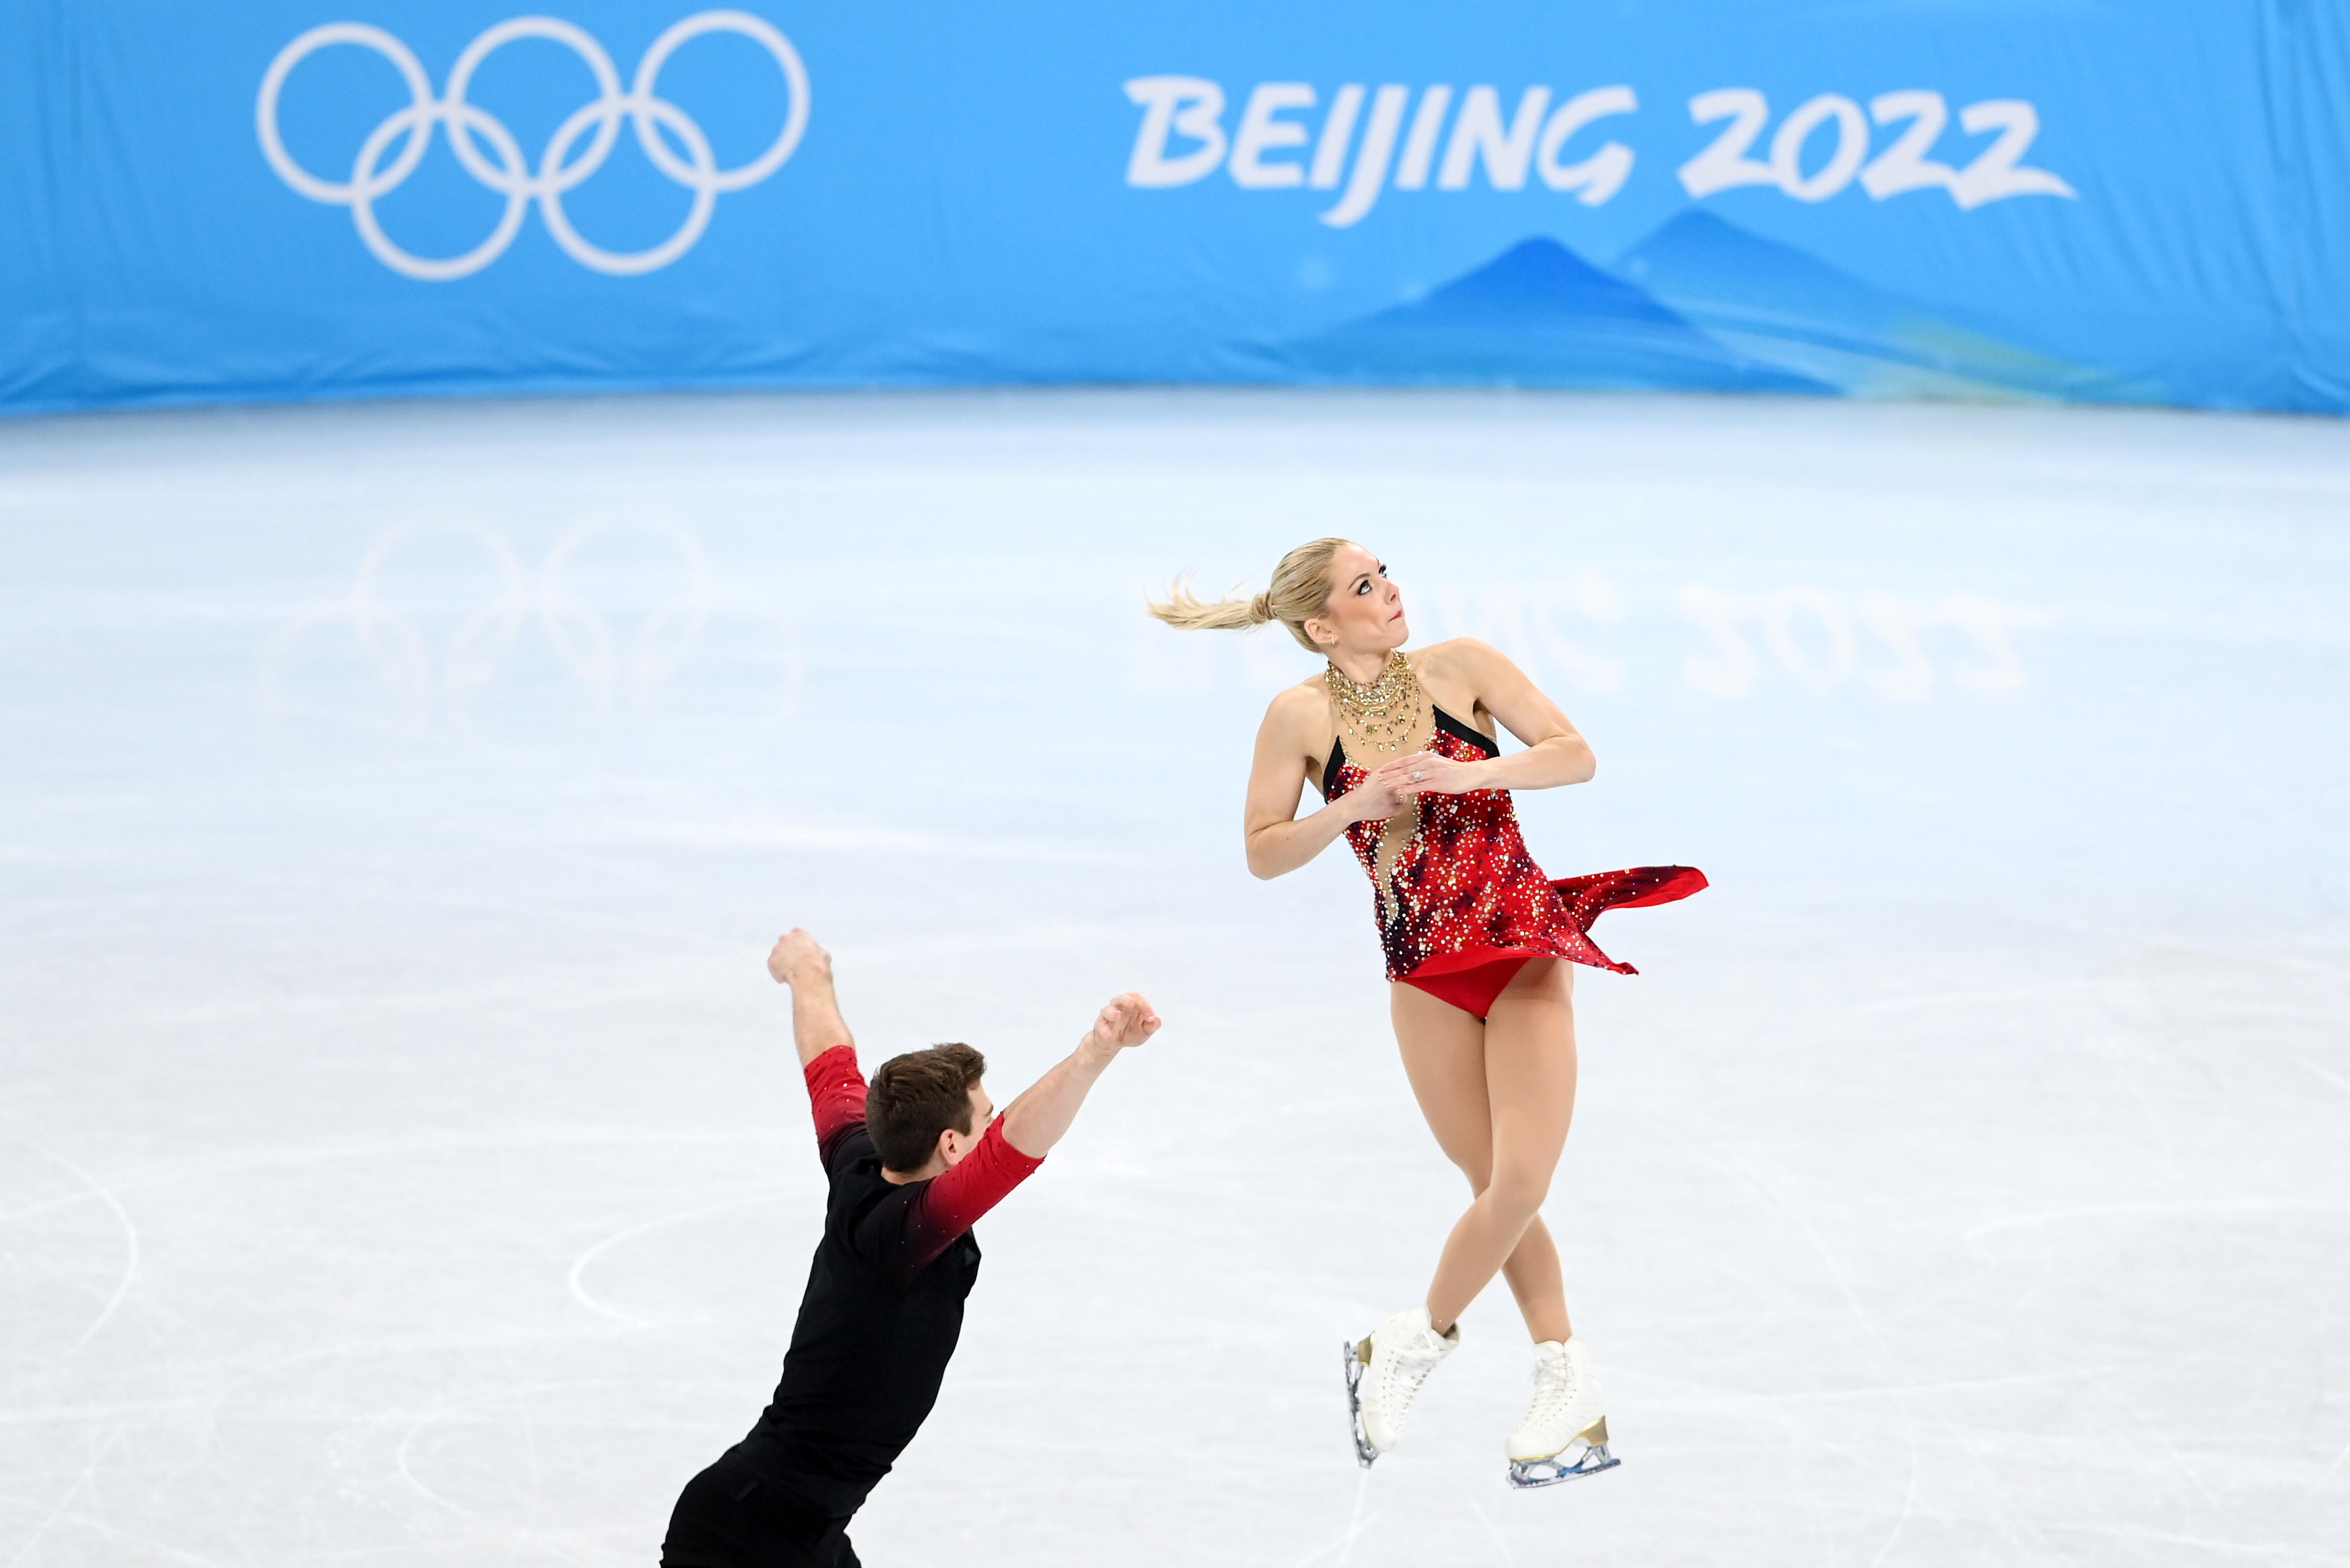 Heres How and When to Watch Figure Skating in the 2022 Winter Olympics